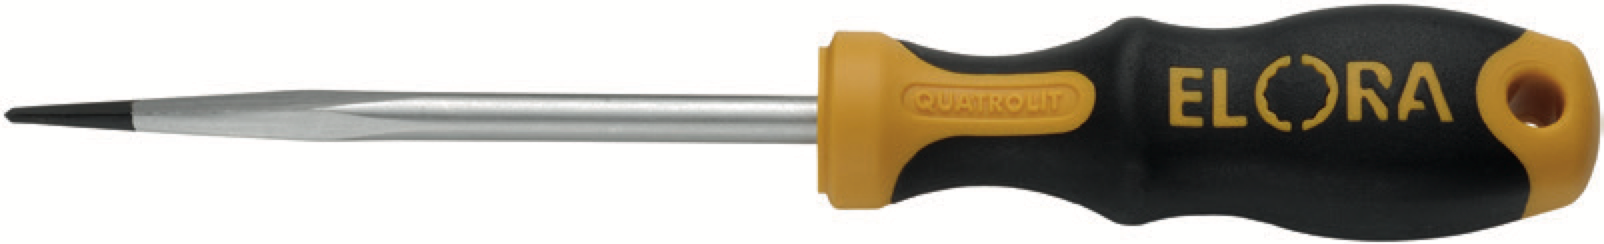 ELORA 746 Square Awl (ELORA Tools) - Premium Drift, Center, Pin Punches from ELORA - Shop now at Yew Aik.